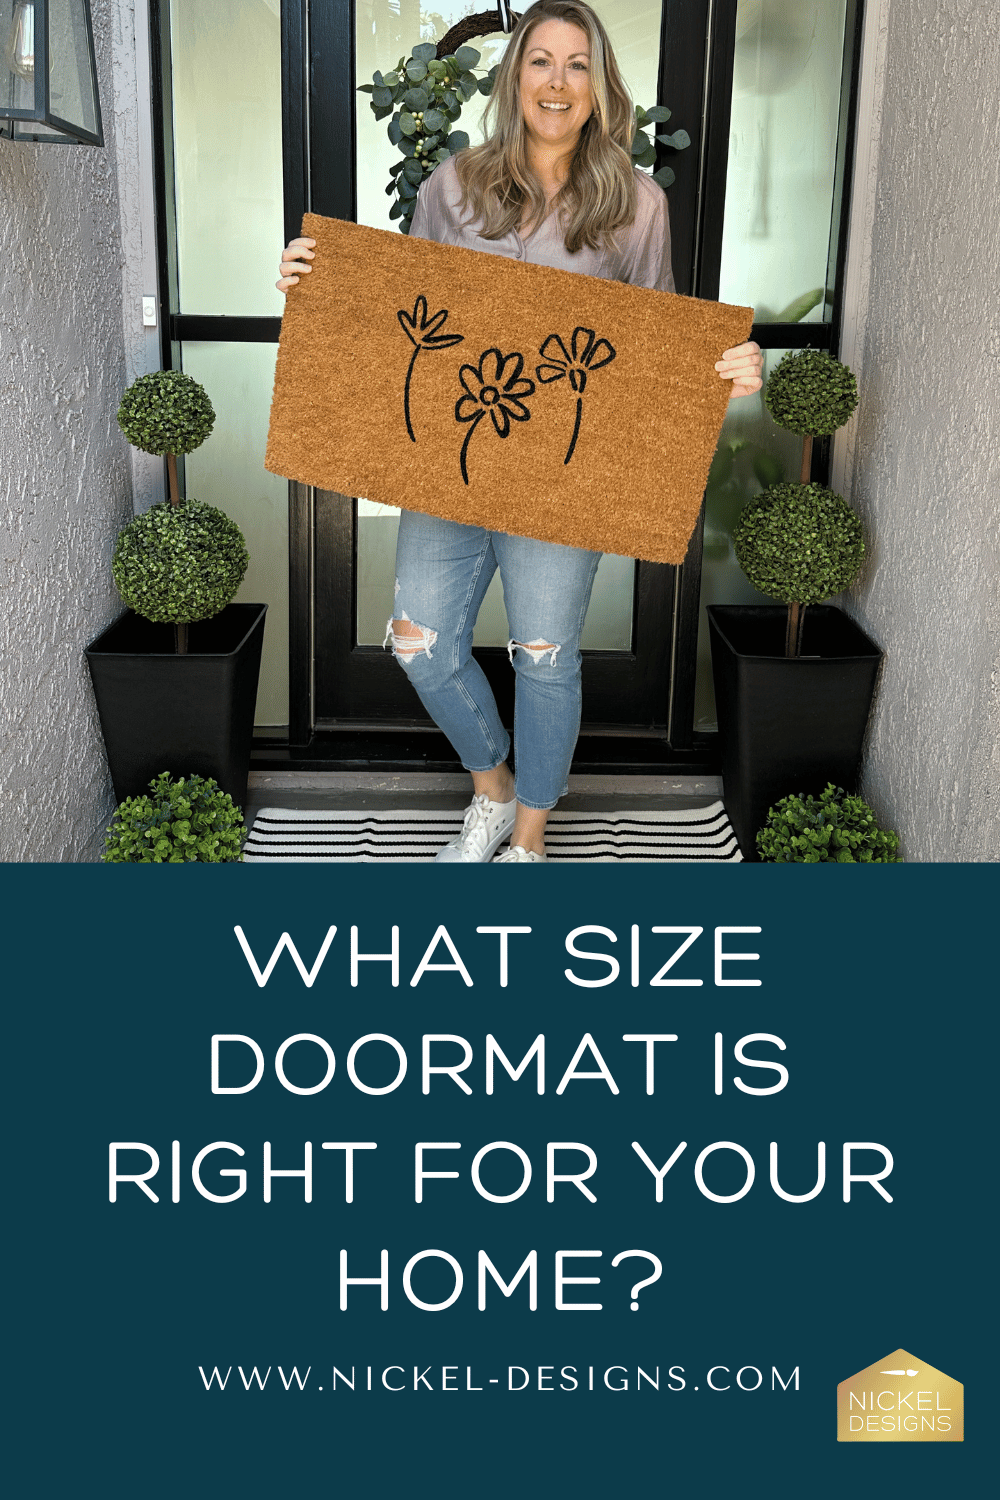 How to choose the right size doormat for your front porch - some tips!